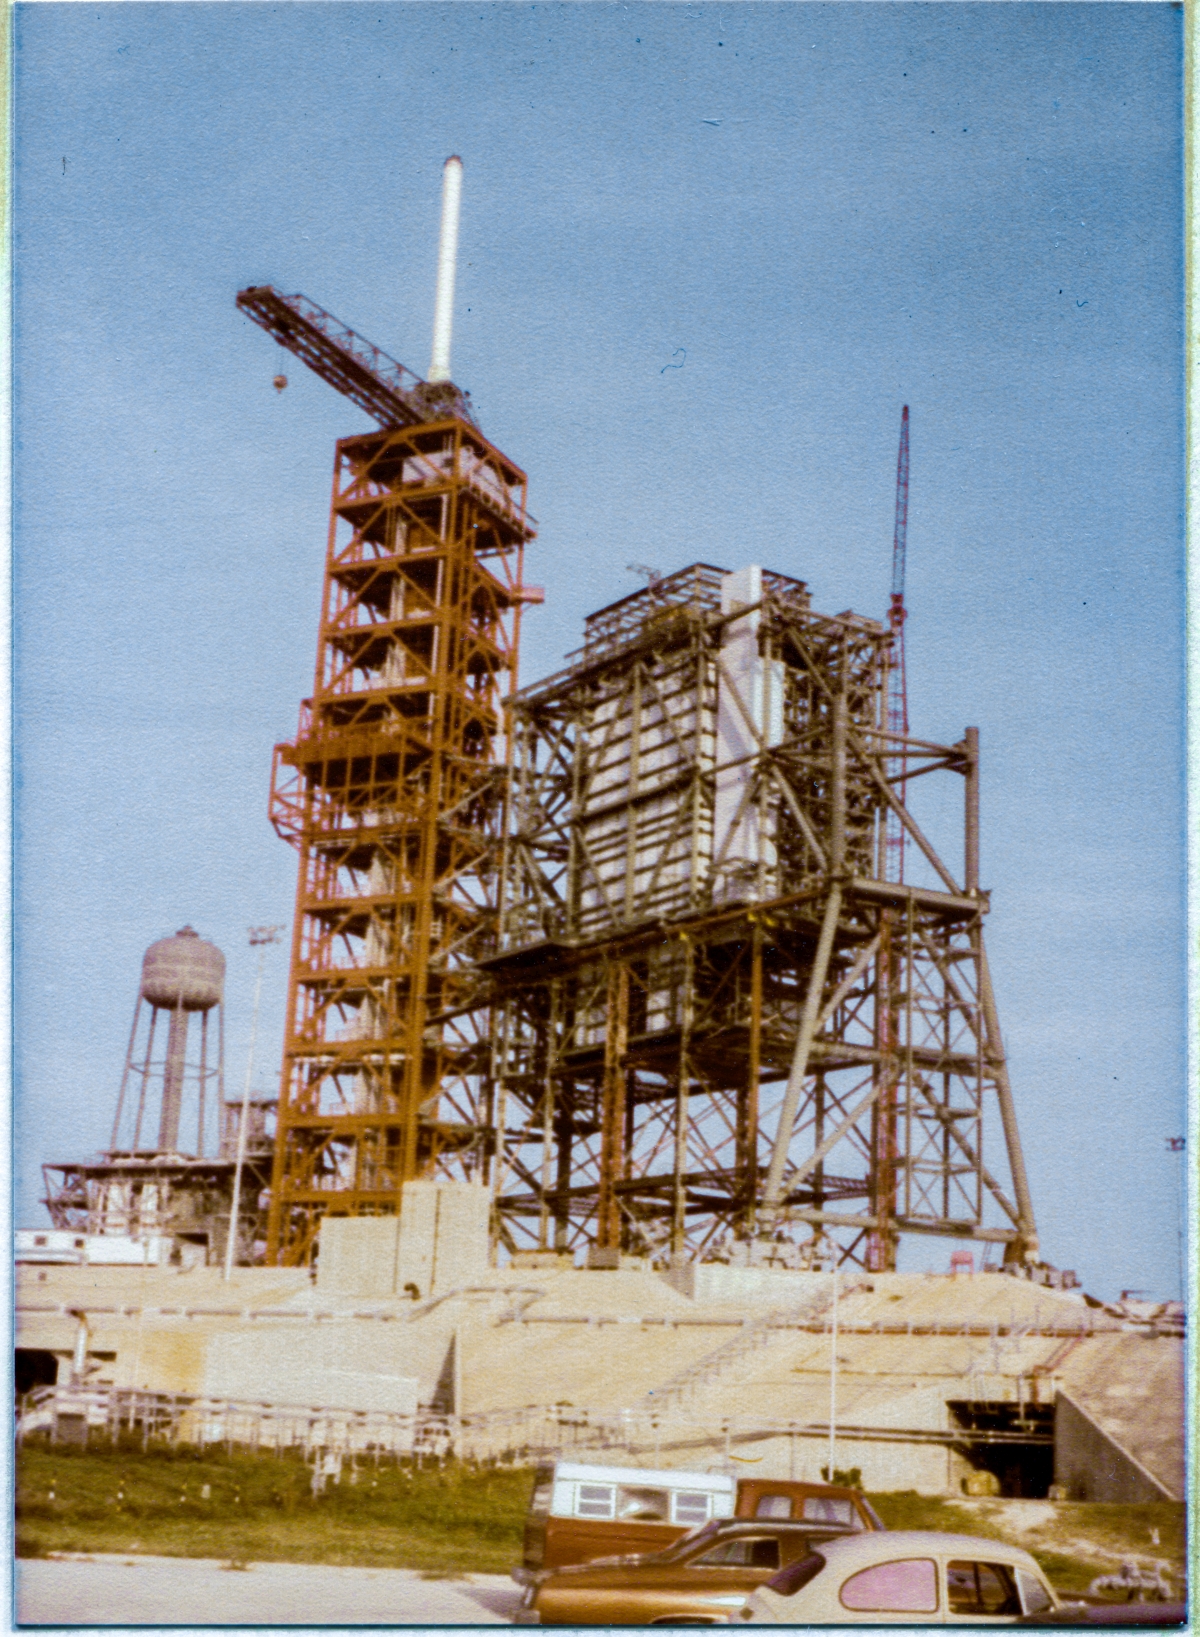 Image 006. Viewed from in front of Sheffield Steel’s field trailer, the structures on Space Shuttle Launch Complex 39-B, Kennedy Space Center, Florida, can be seen, squarely front-lit in the late afternoon. Visible in this image, you can see the concrete structure of the pad itself, the Sound Suppression System water tower, the red multi-platformed structure of the FSS, and the growing steel framework of the RSS still resting on the falsework which will continue to support it until it becomes sufficiently-complete to carry its own weight, allowing for the removal of the falsework. Photo by James MacLaren.